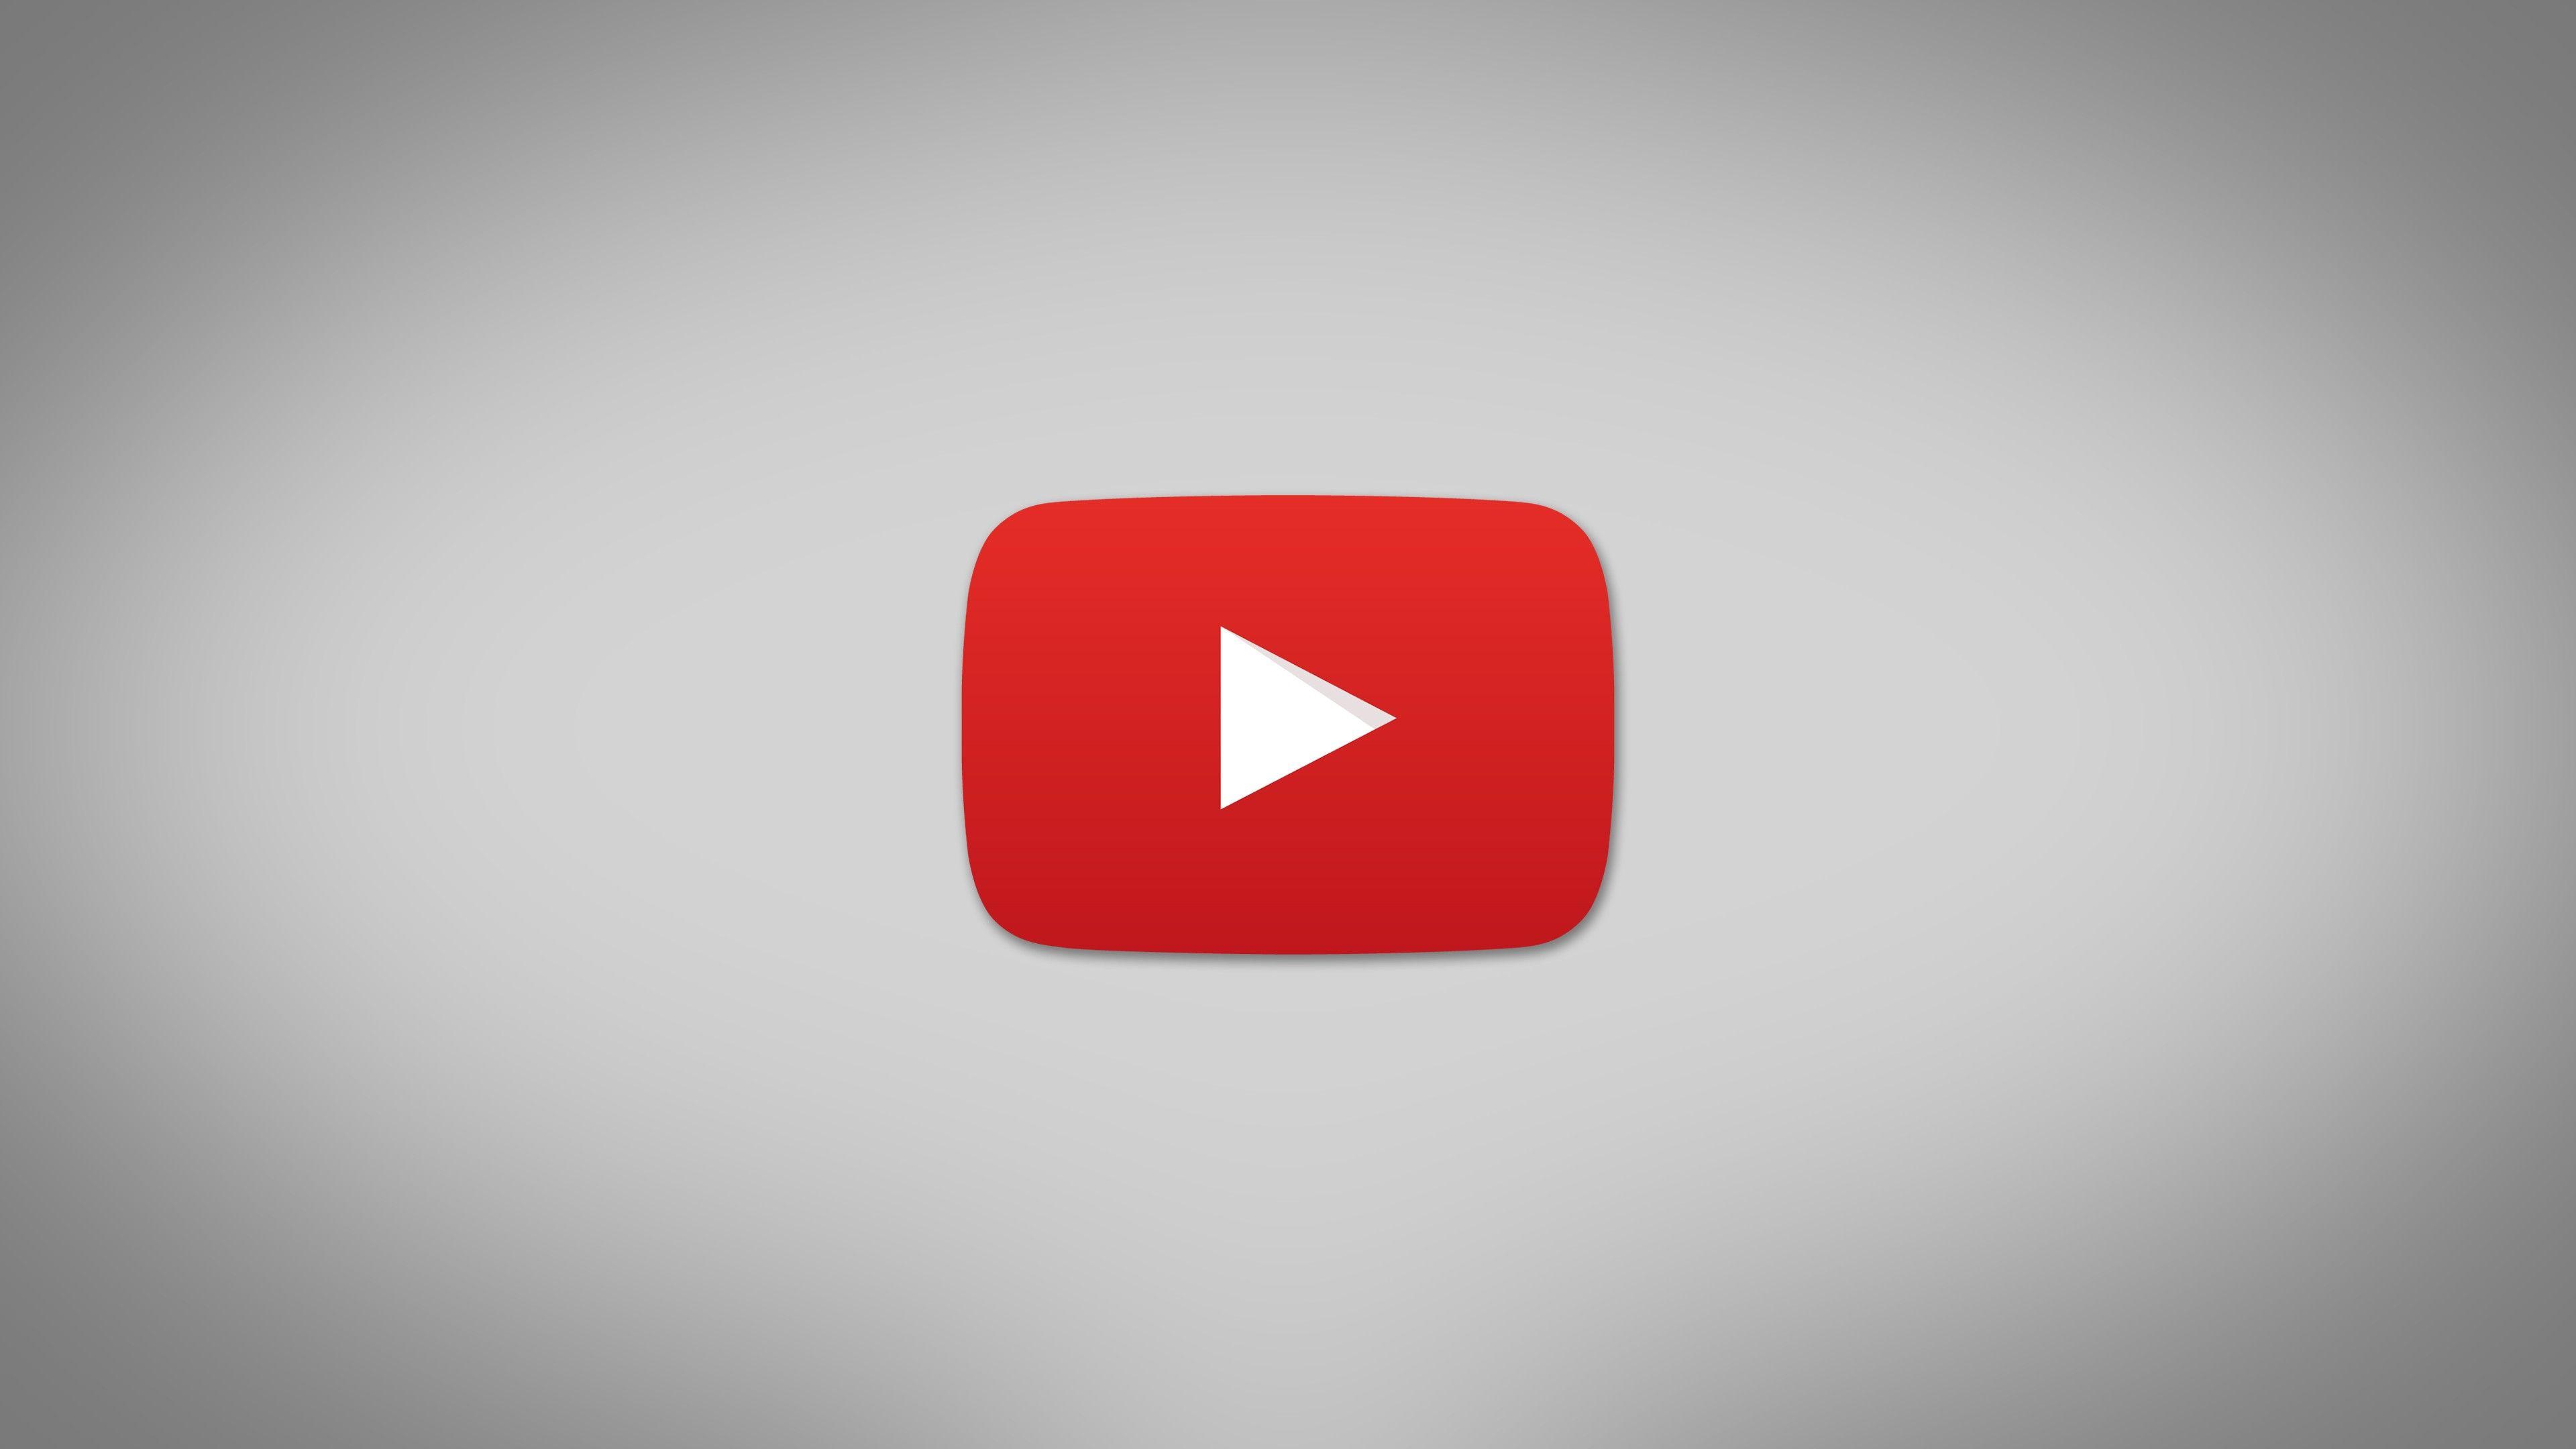 YouTube Original Logo - Youtube Original Logo In 4k, HD Logo, 4k Wallpapers, Images ...